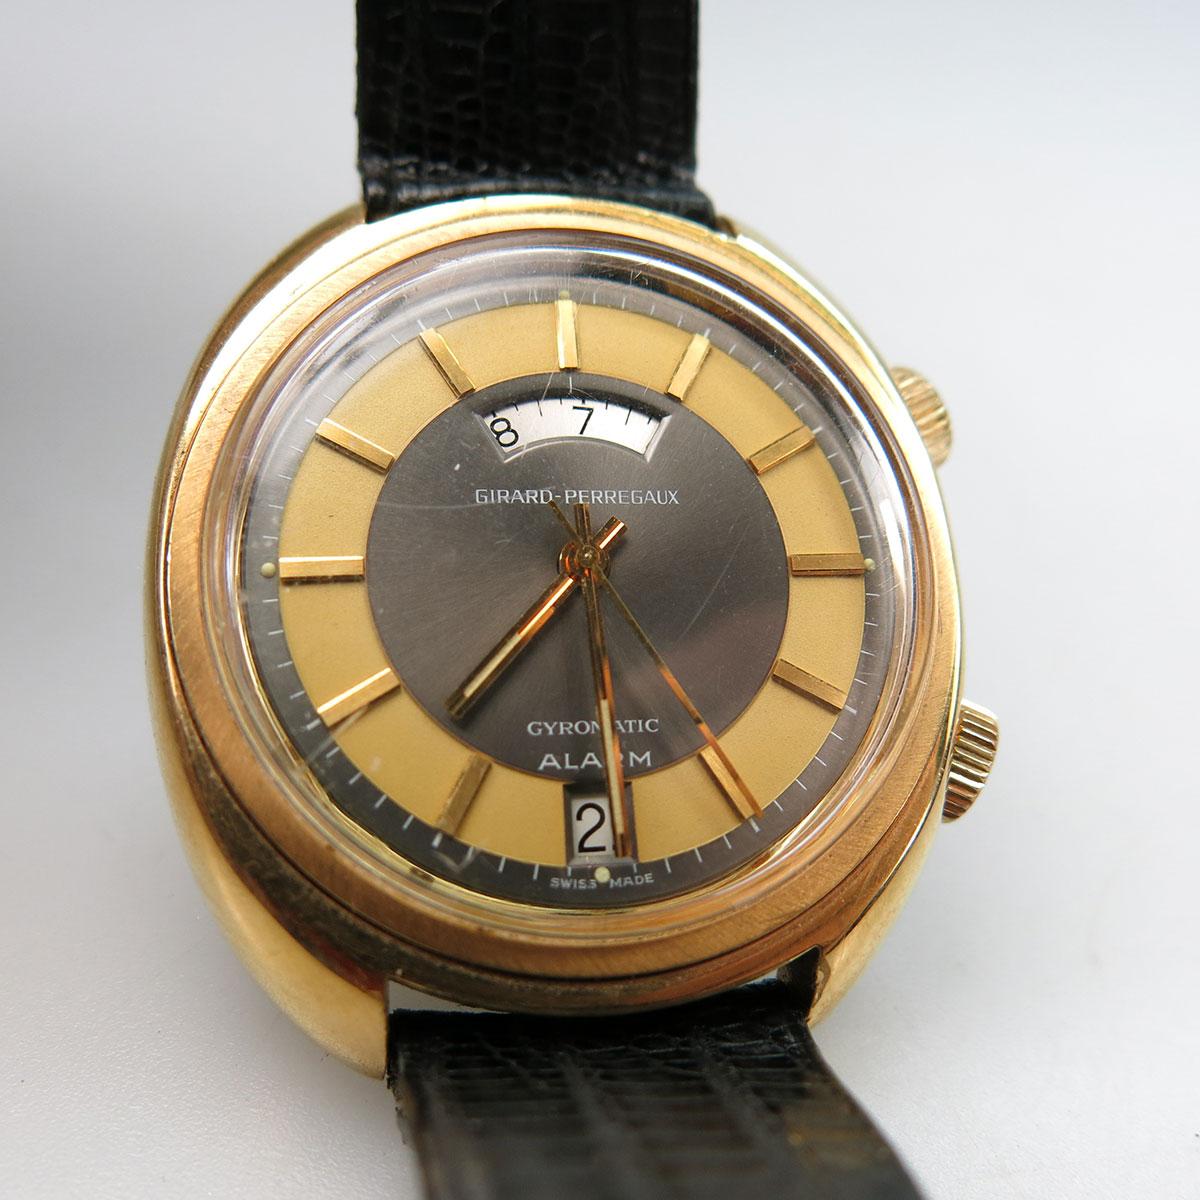 Girard-Perregaux Gyromatic Wristwatch With Date And Alarm